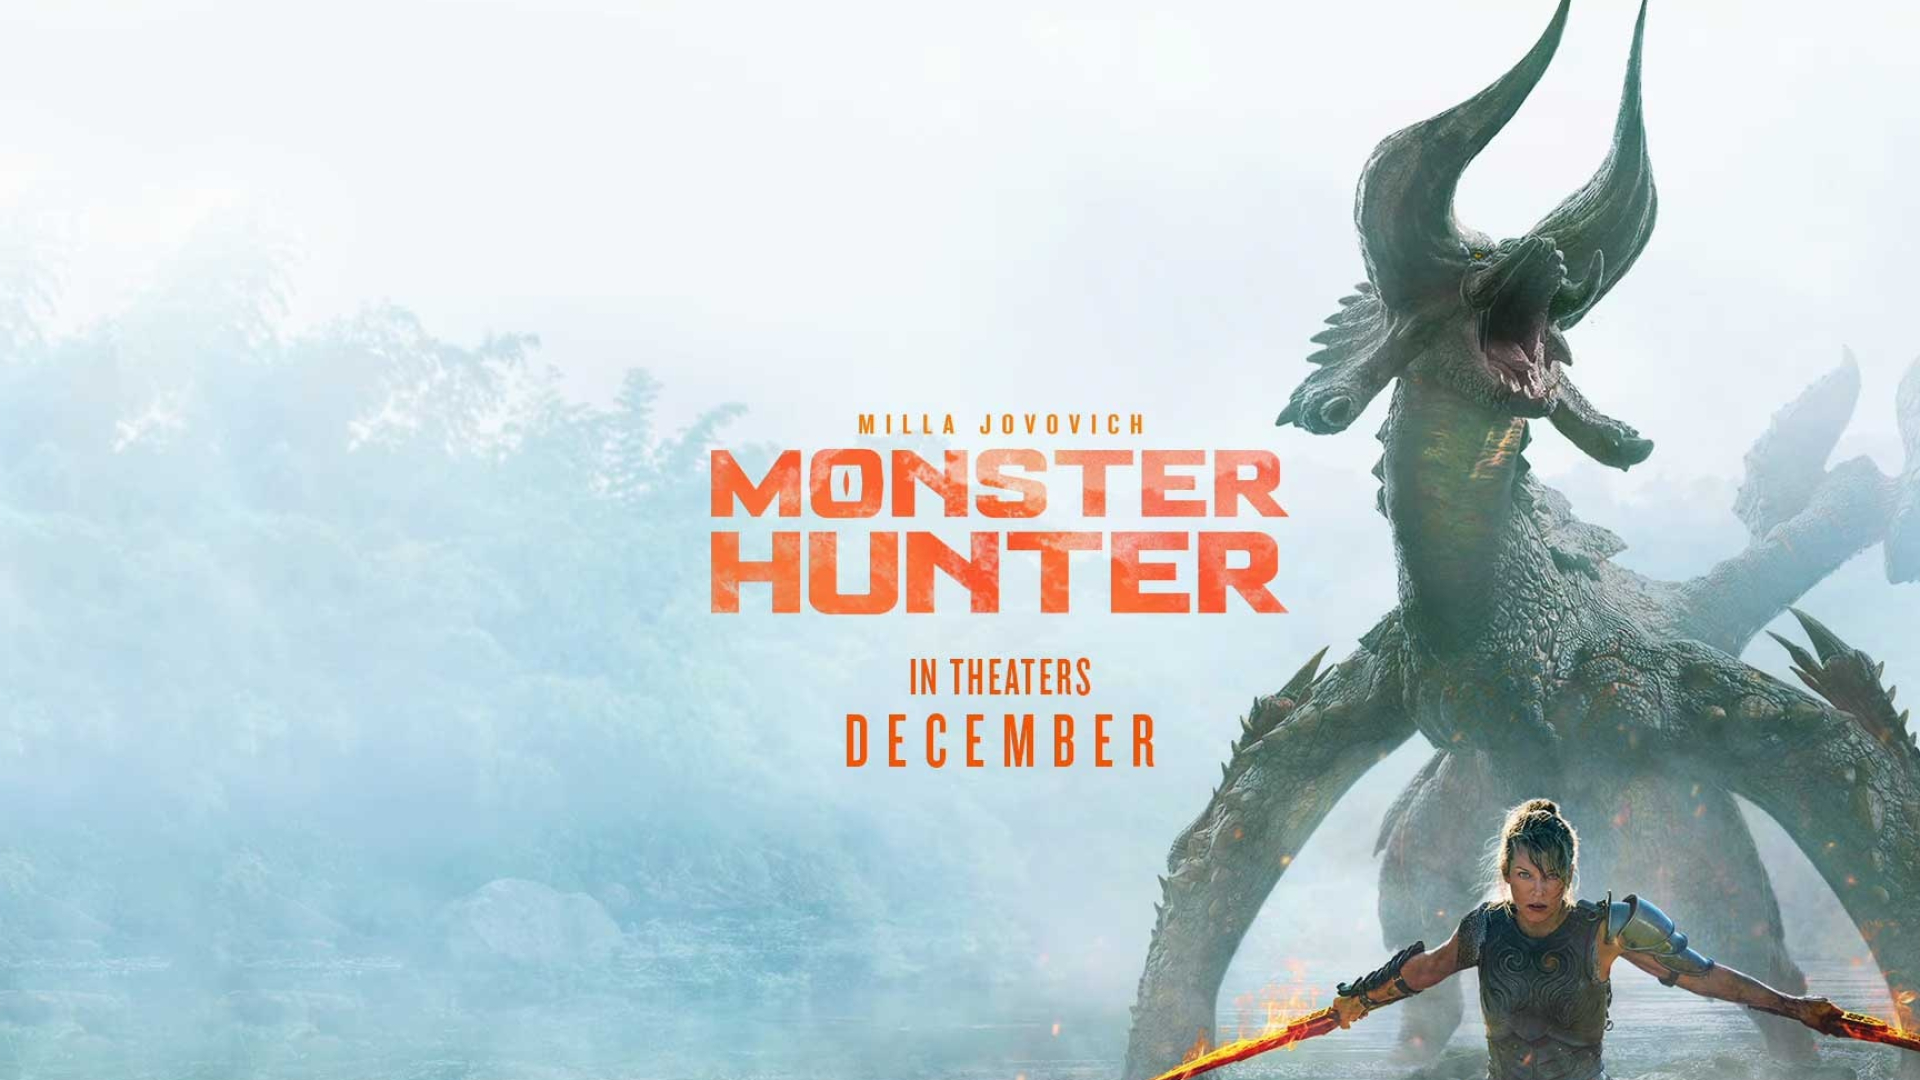 Monster Hunter: A world of dangerous and powerful monsters, Movie poster. 1920x1080 Full HD Wallpaper.